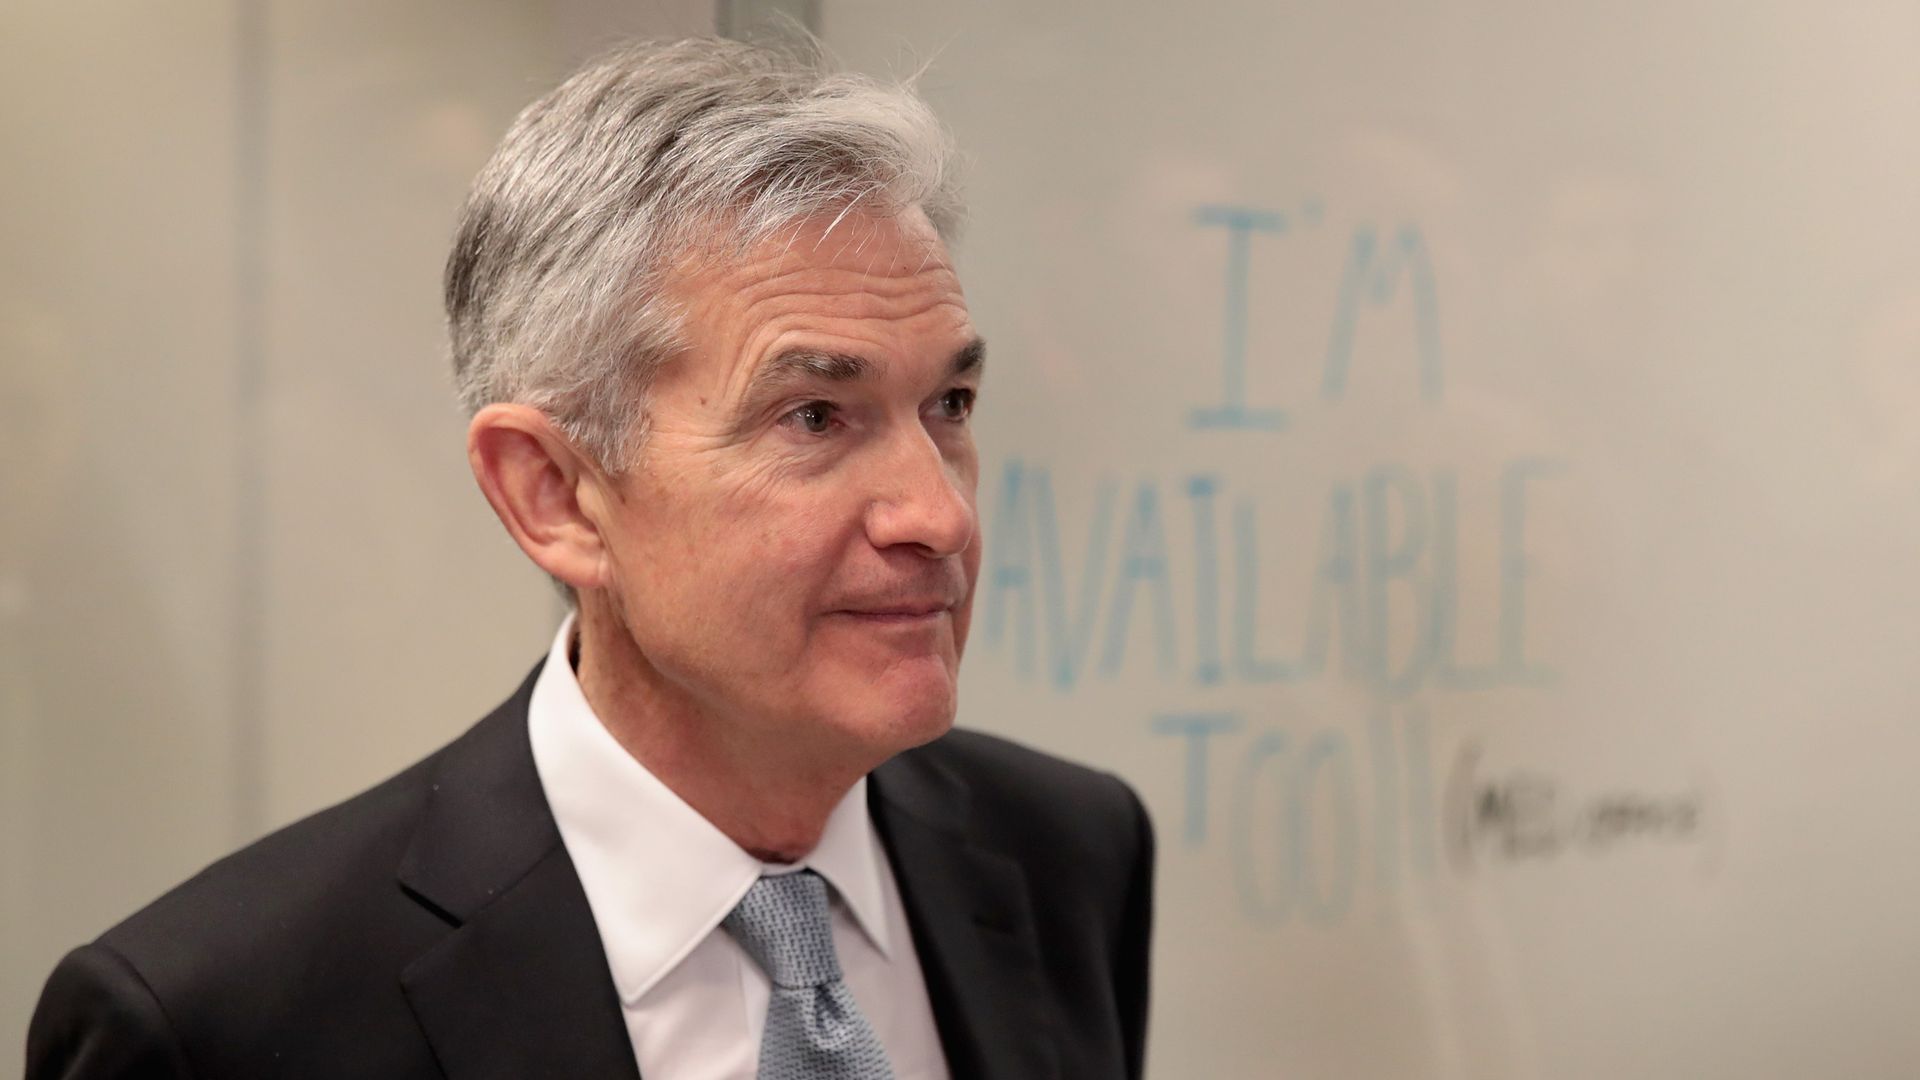 Federal Reserve Chairman Jerome Powell.